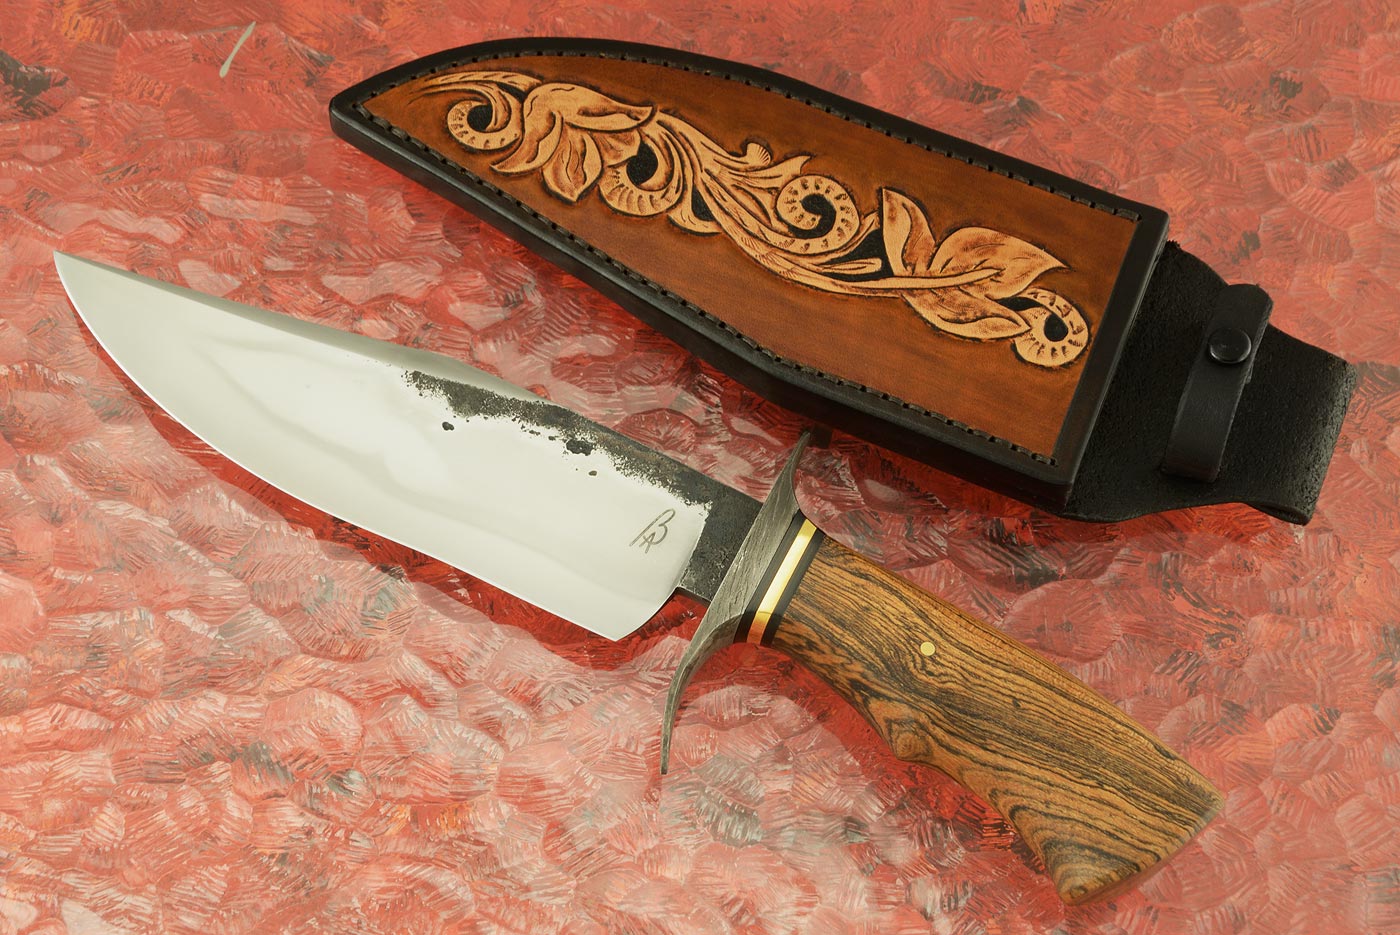 Hamon Camp Bowie with Bocote and Wrought Iron